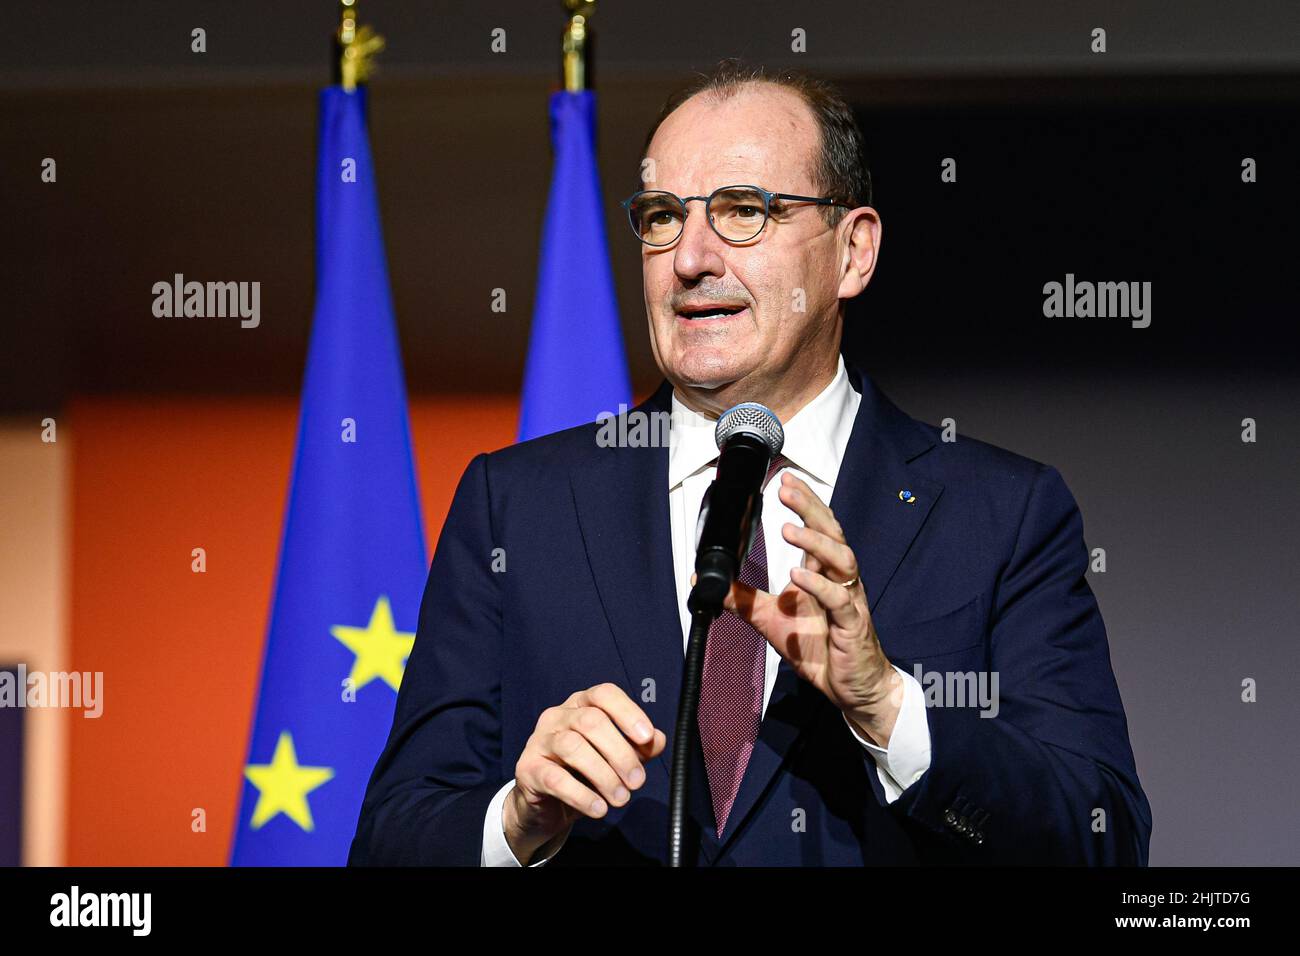 French Prime Minister Jean Castex during the 80th anniversary ceremony of French Development Agency ('Agence francaise de developpement', AFD), at the Stock Photo